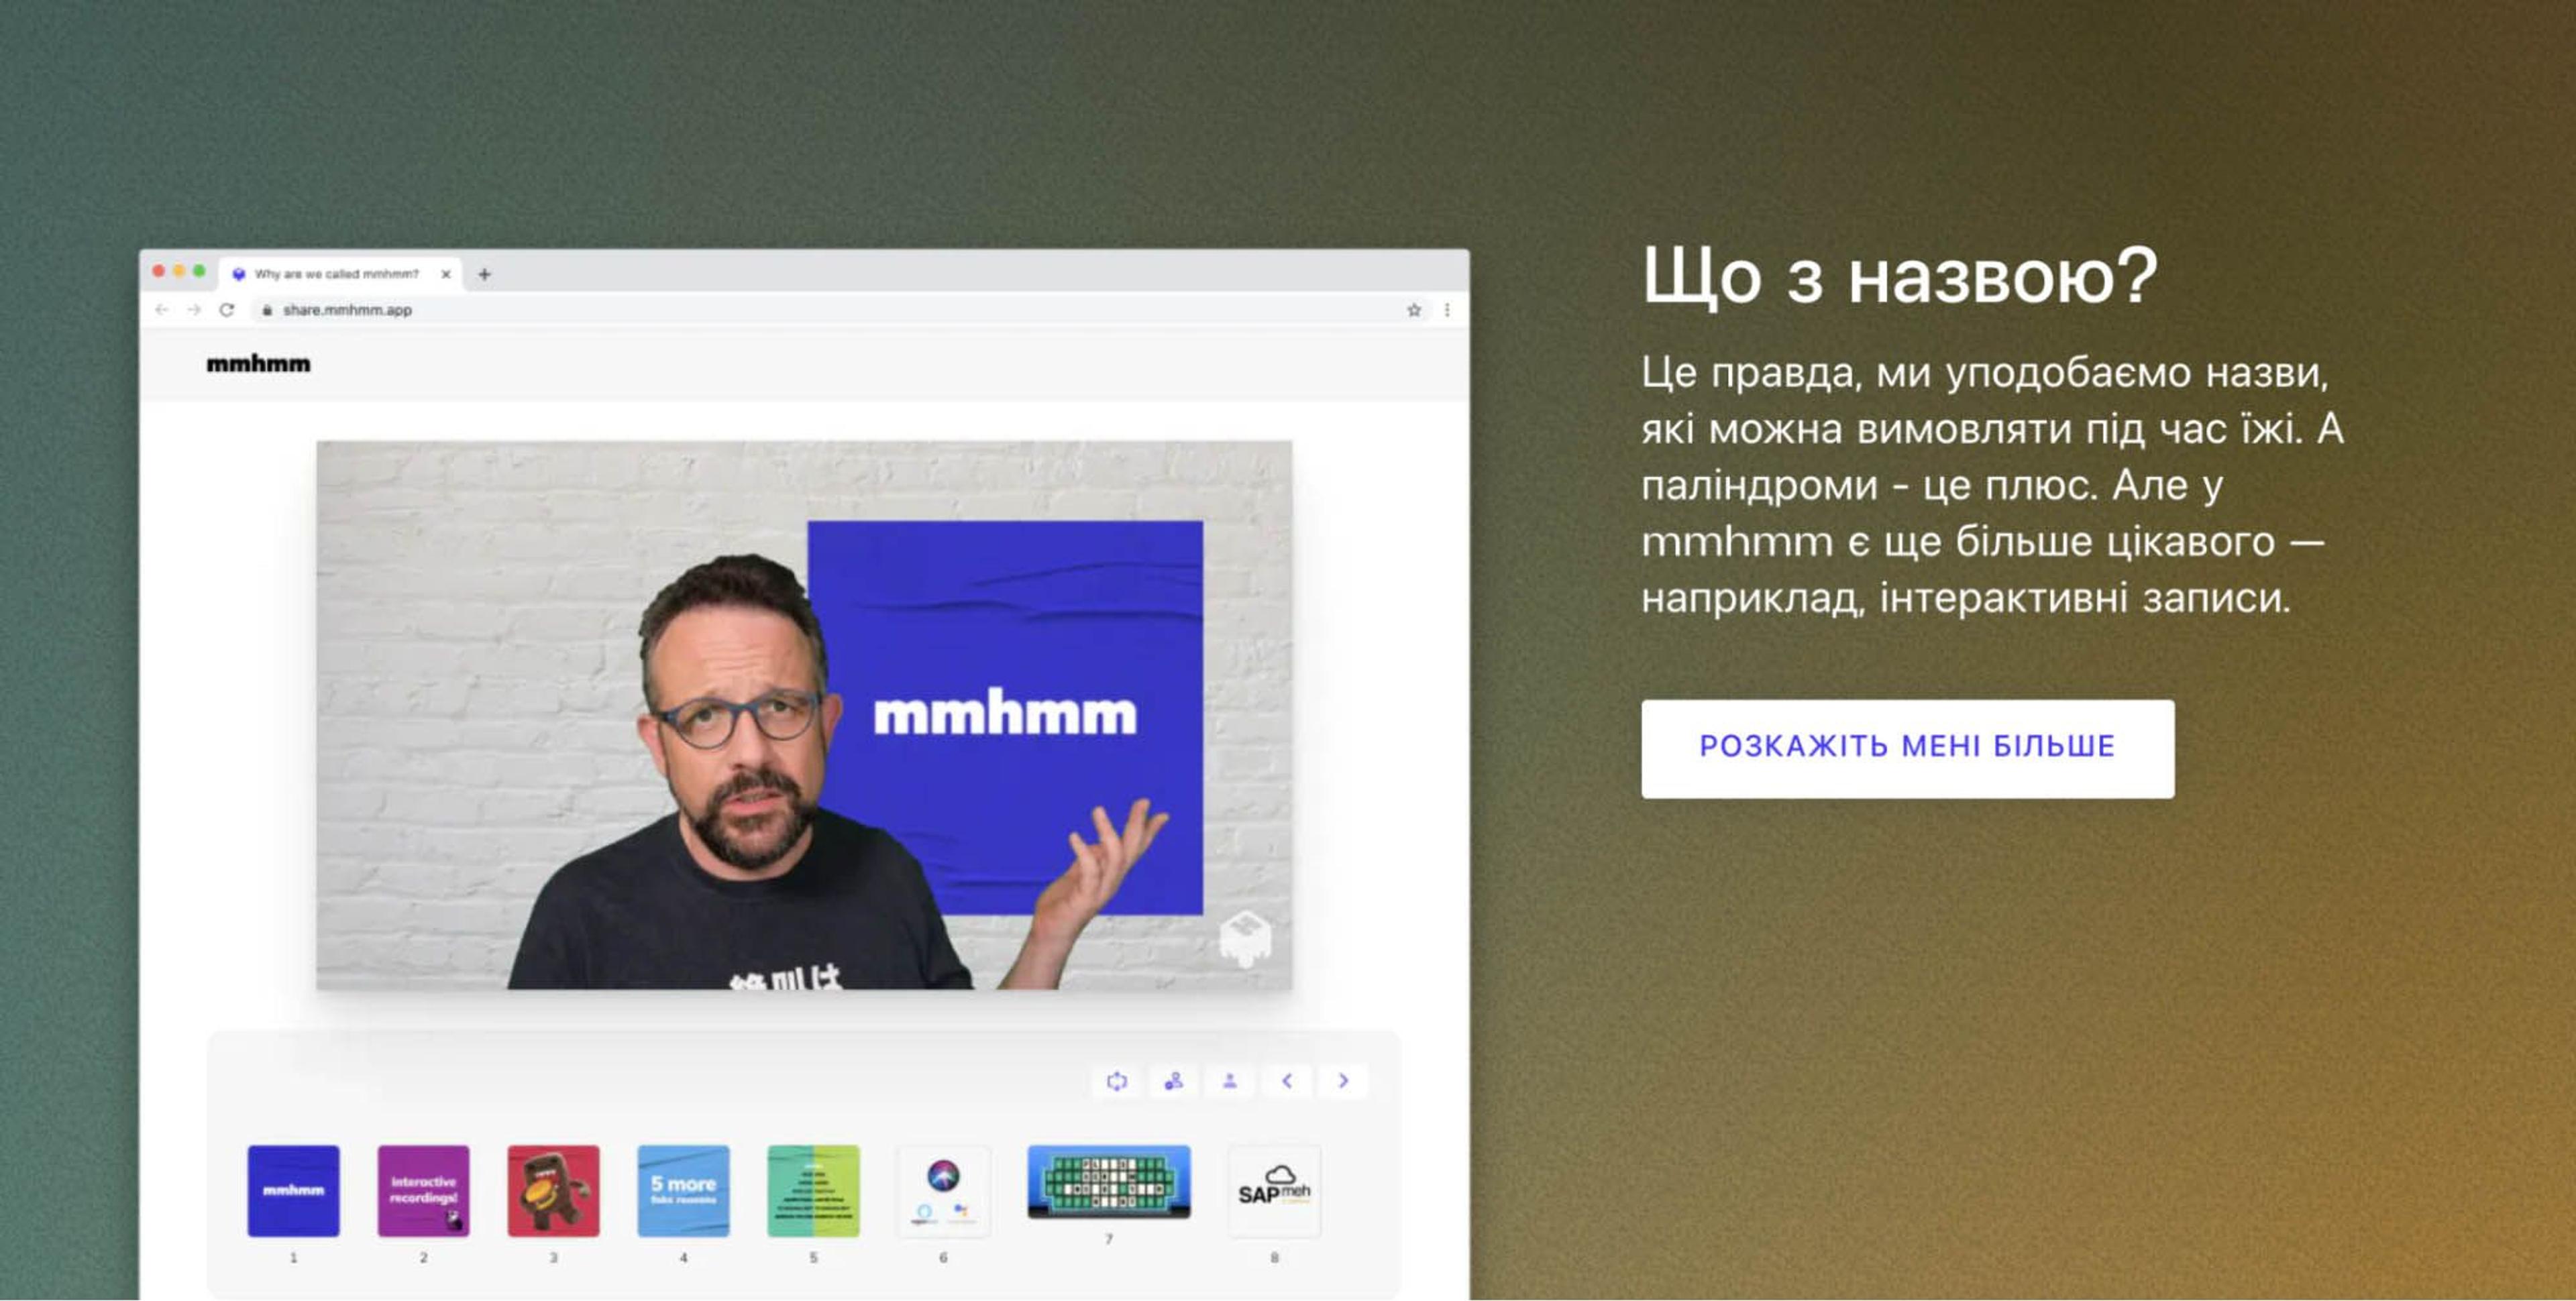 mmhmm website in Ukrainian, which shows a product feature